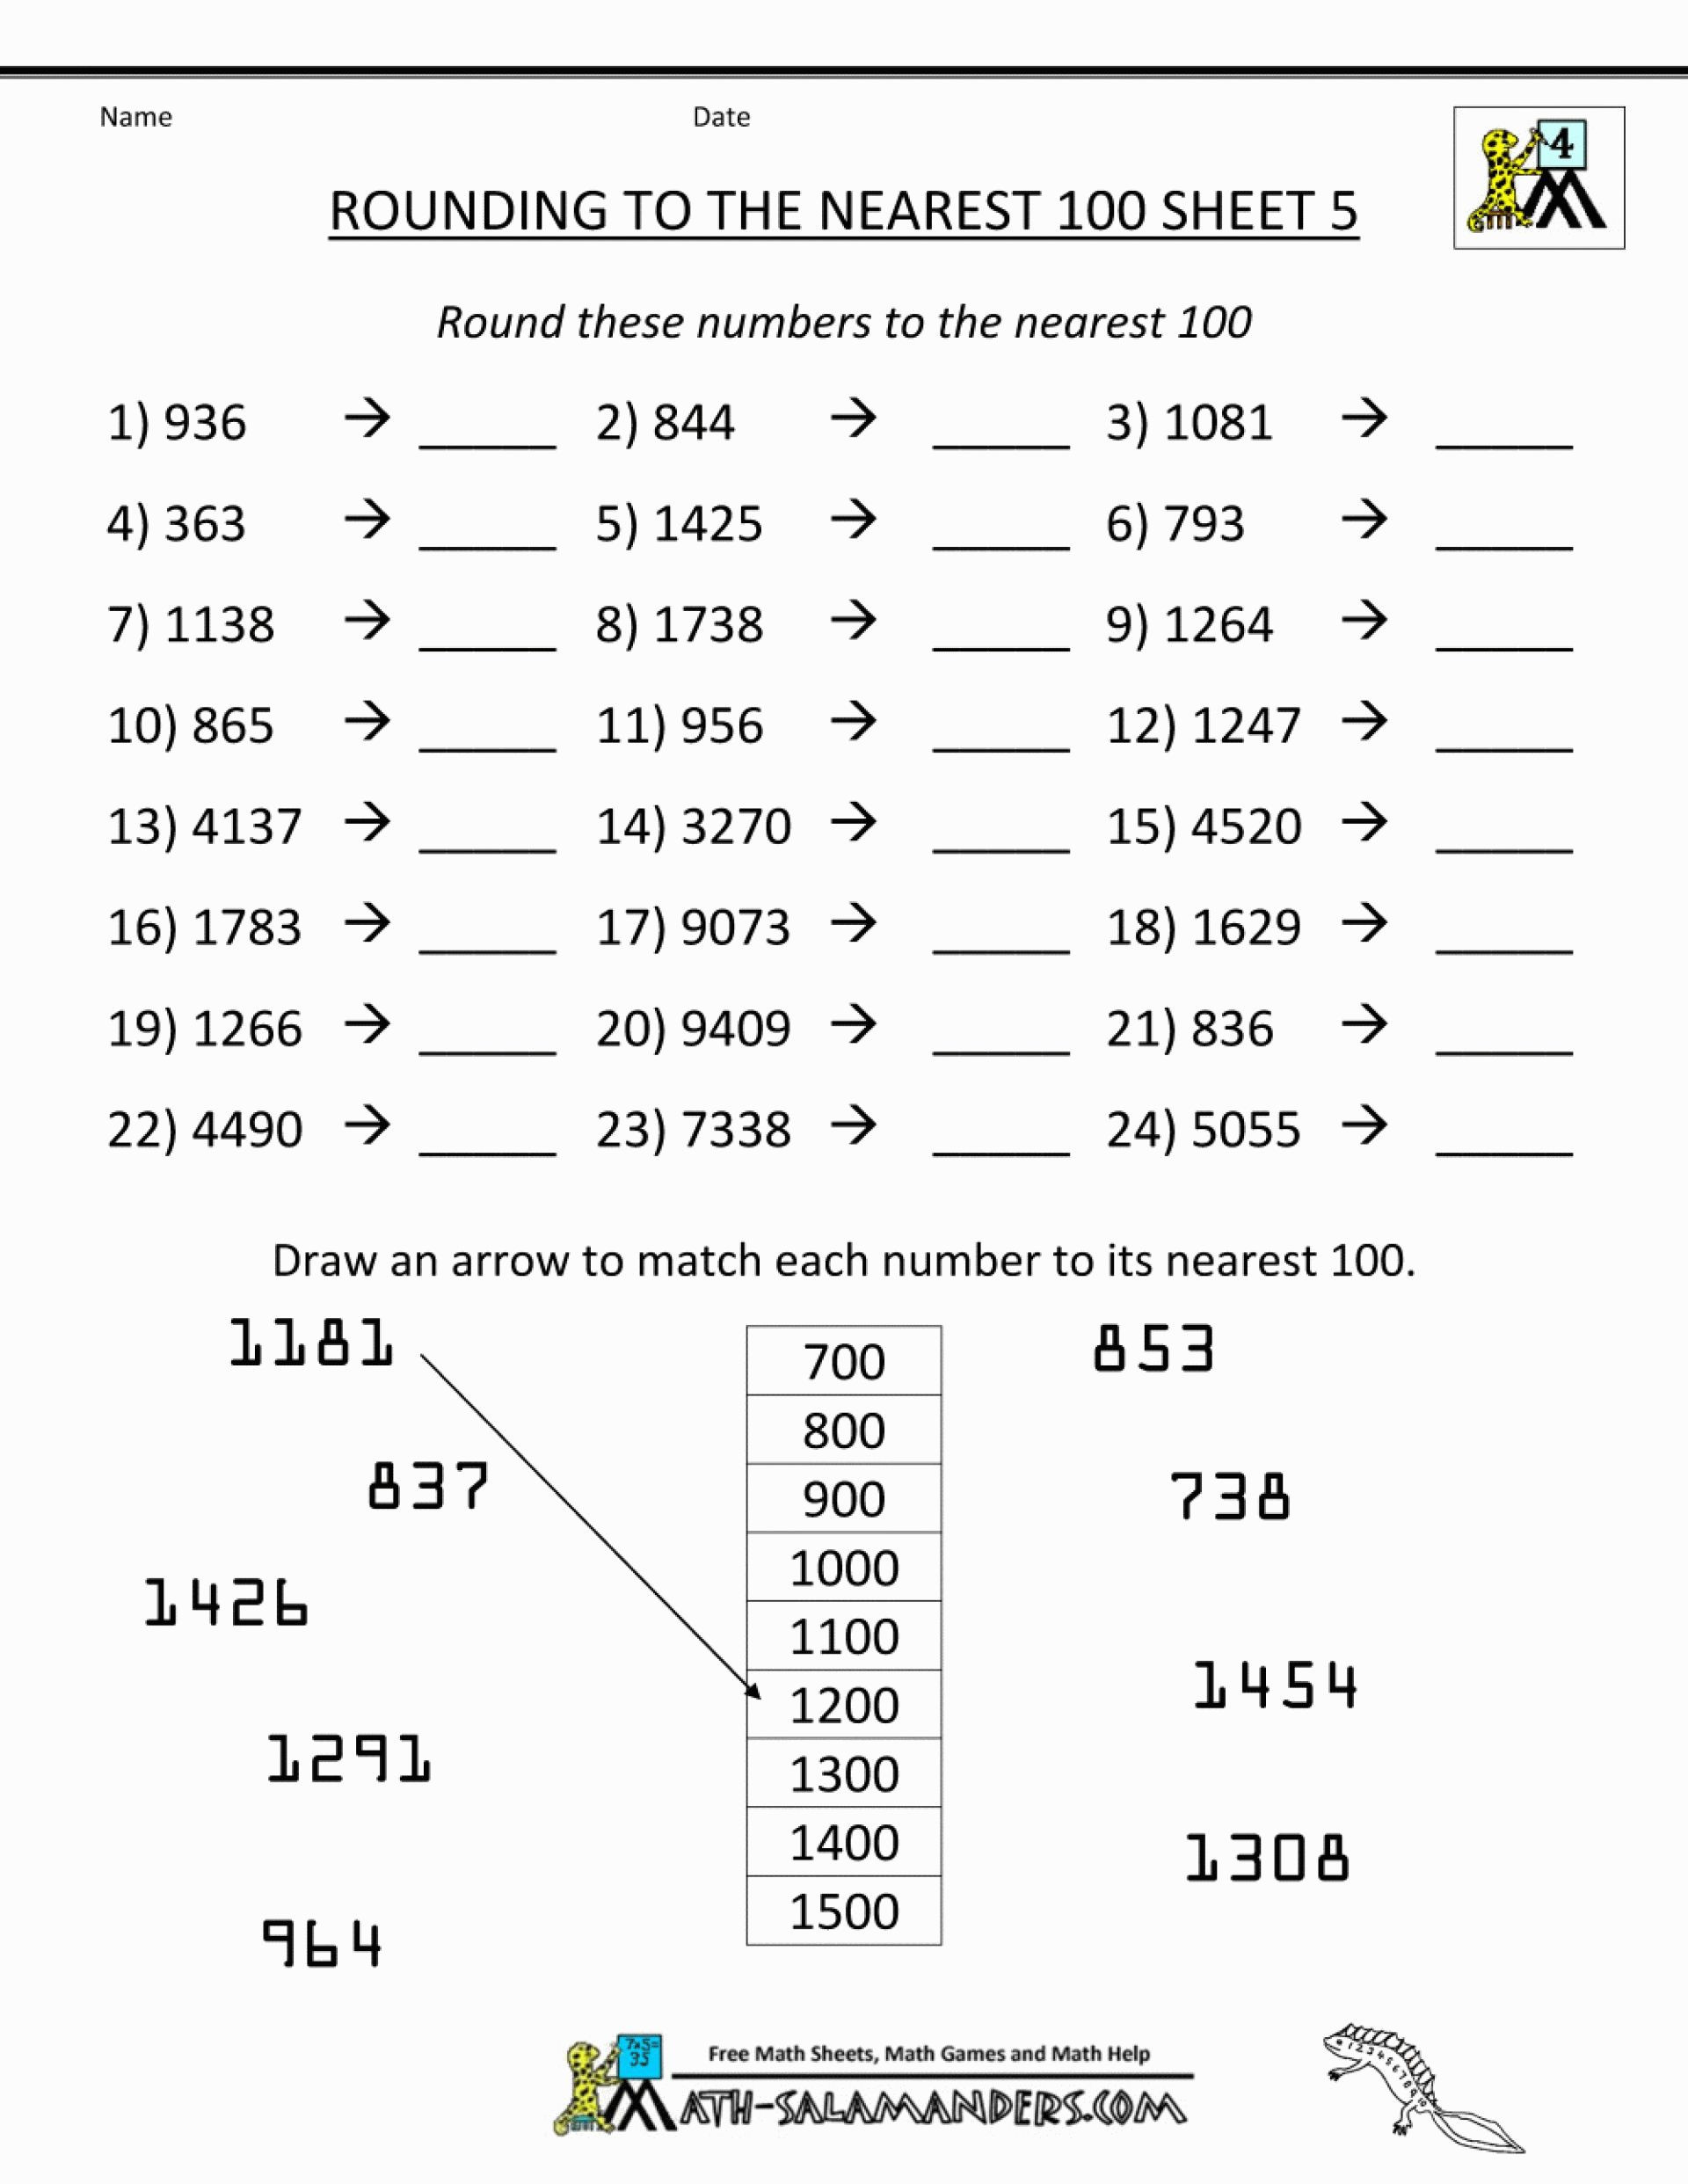 Free Math Worksheets Third Grade 3 Place Value and Rounding Round 3 Digit Numbers Nearest 100